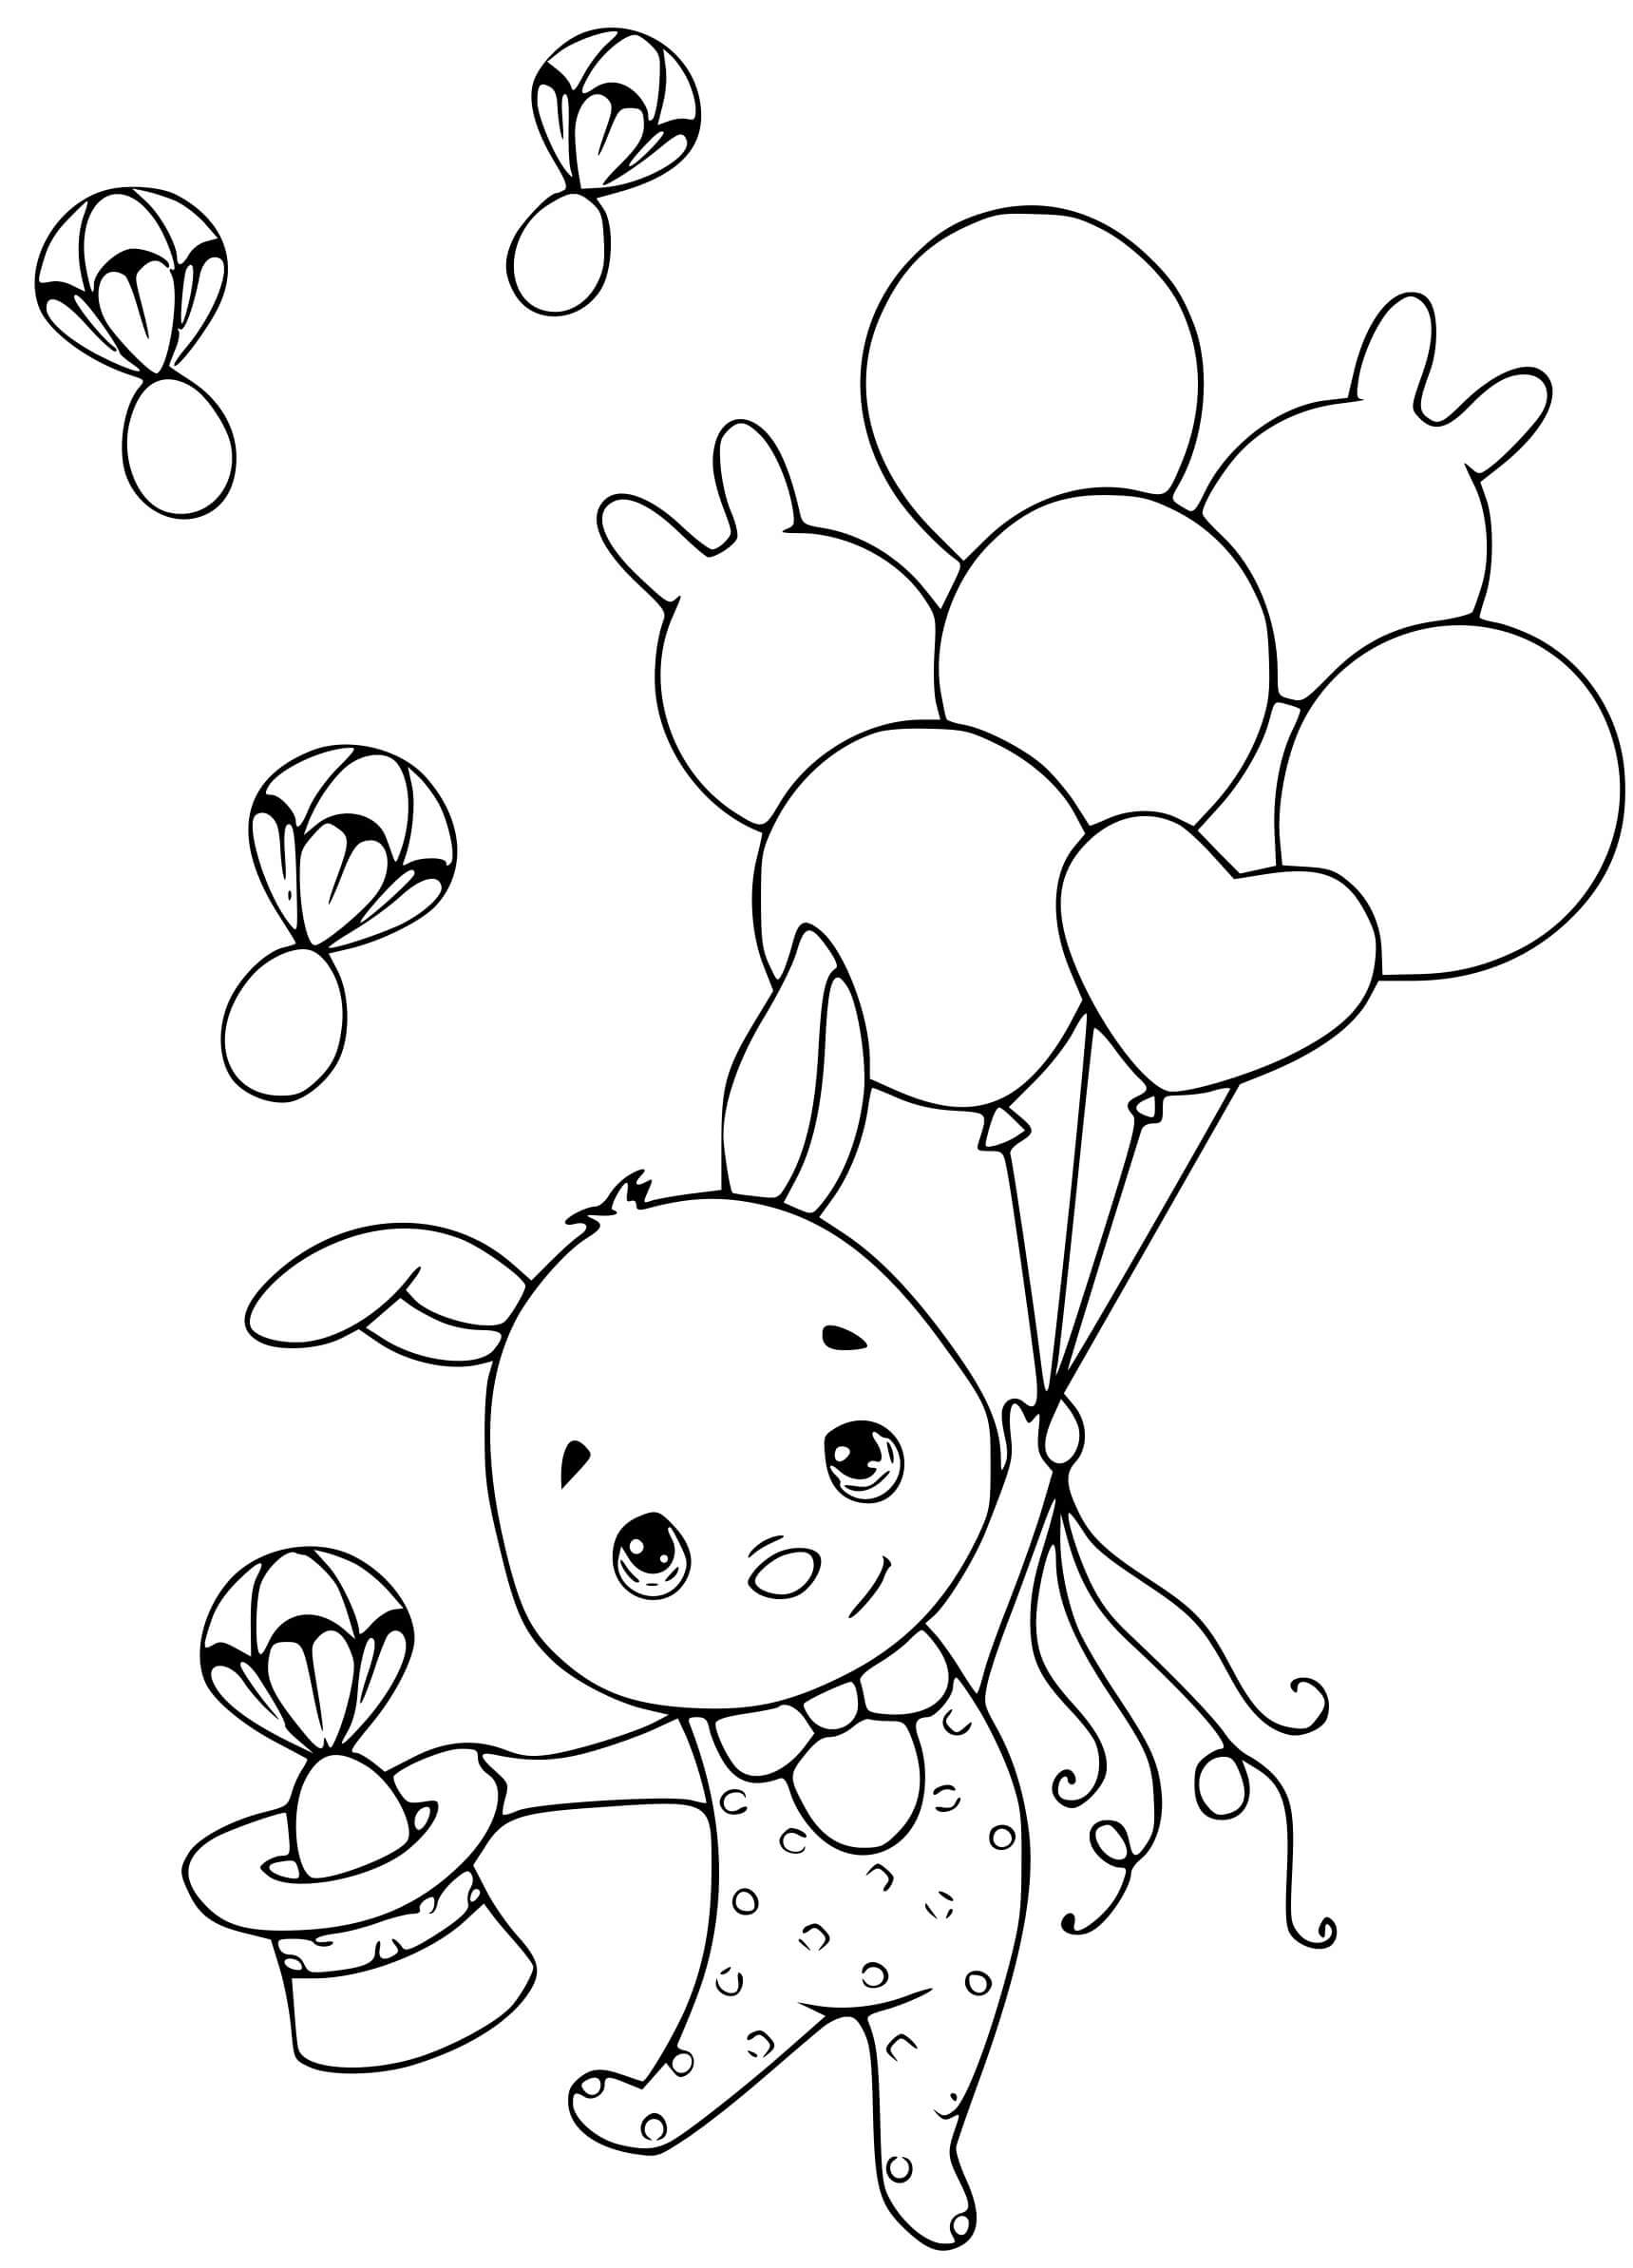 Easter Bunny Flies Balloons Coloring Page